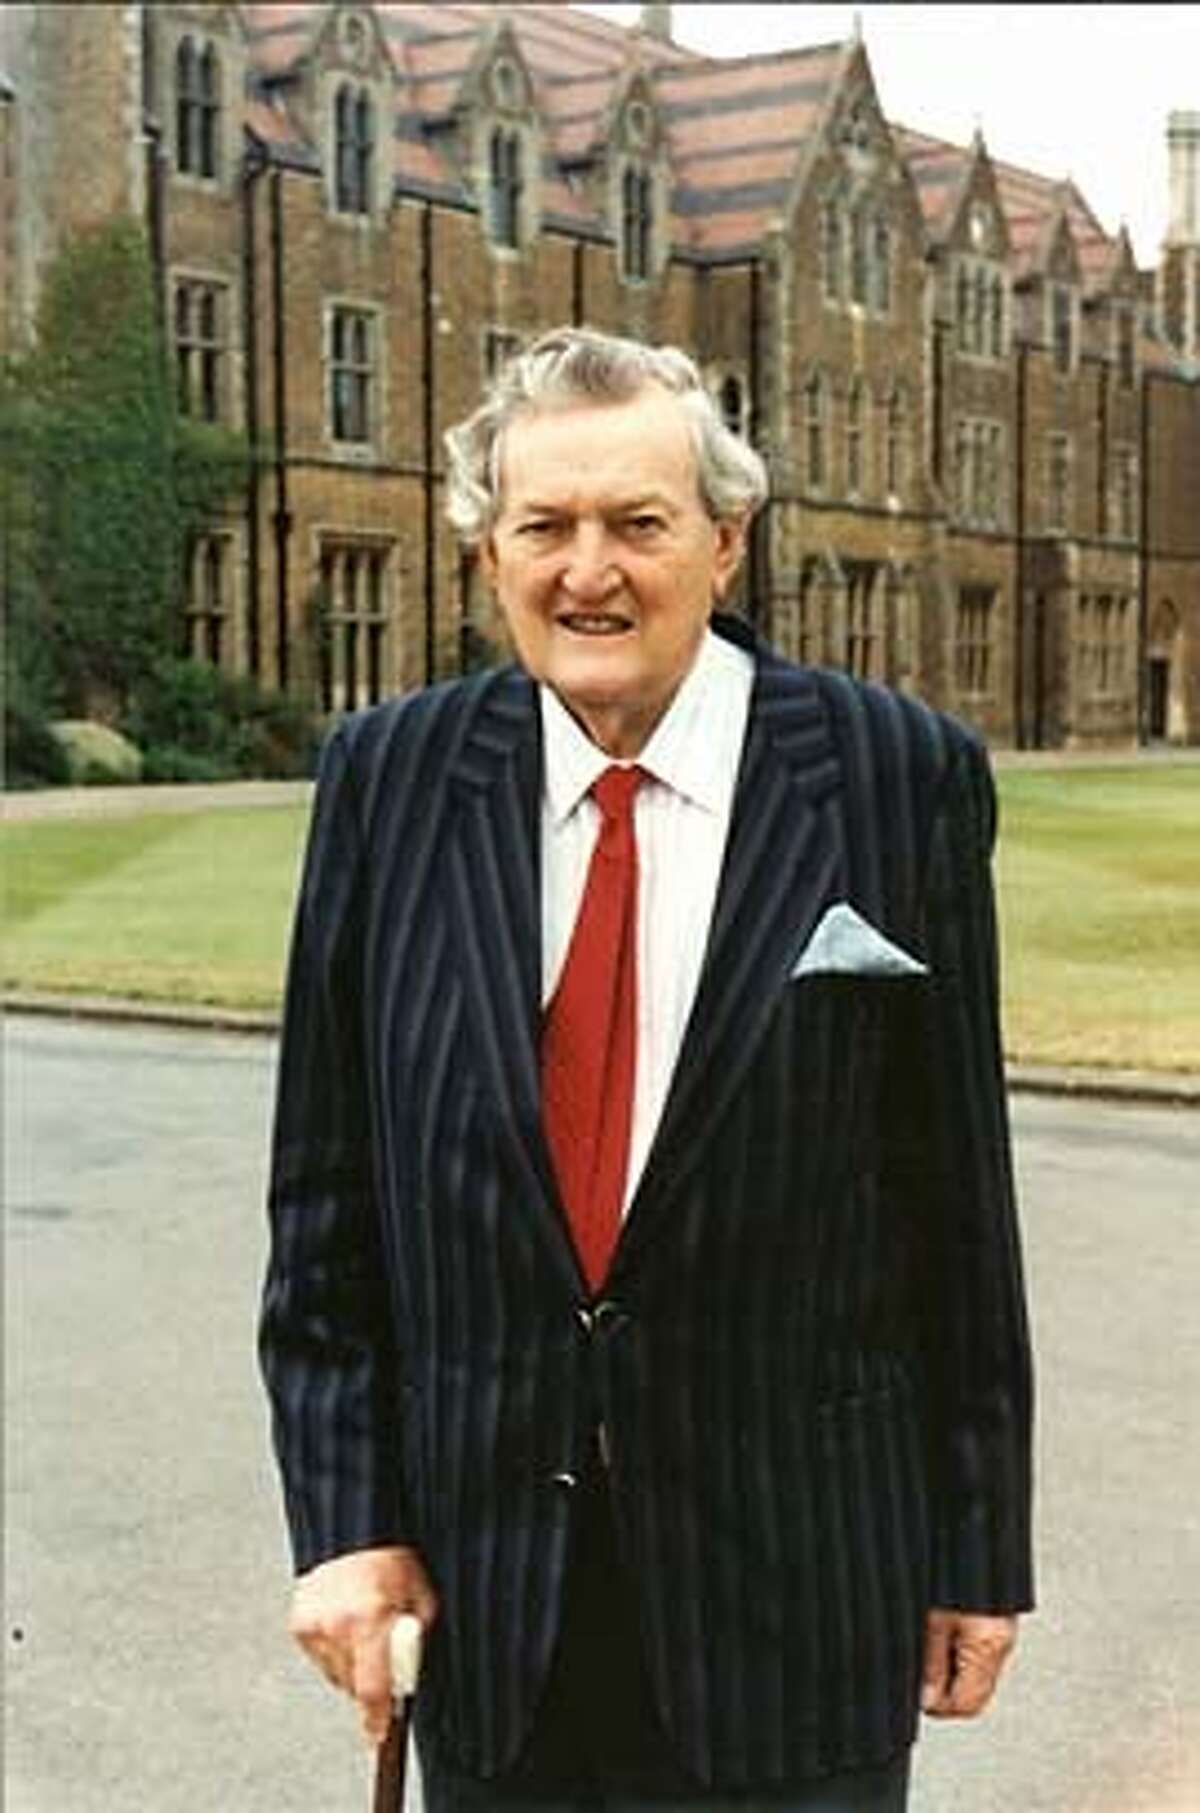 obit photo of Peter Newton, taken in 2005 outside Oxford in England.